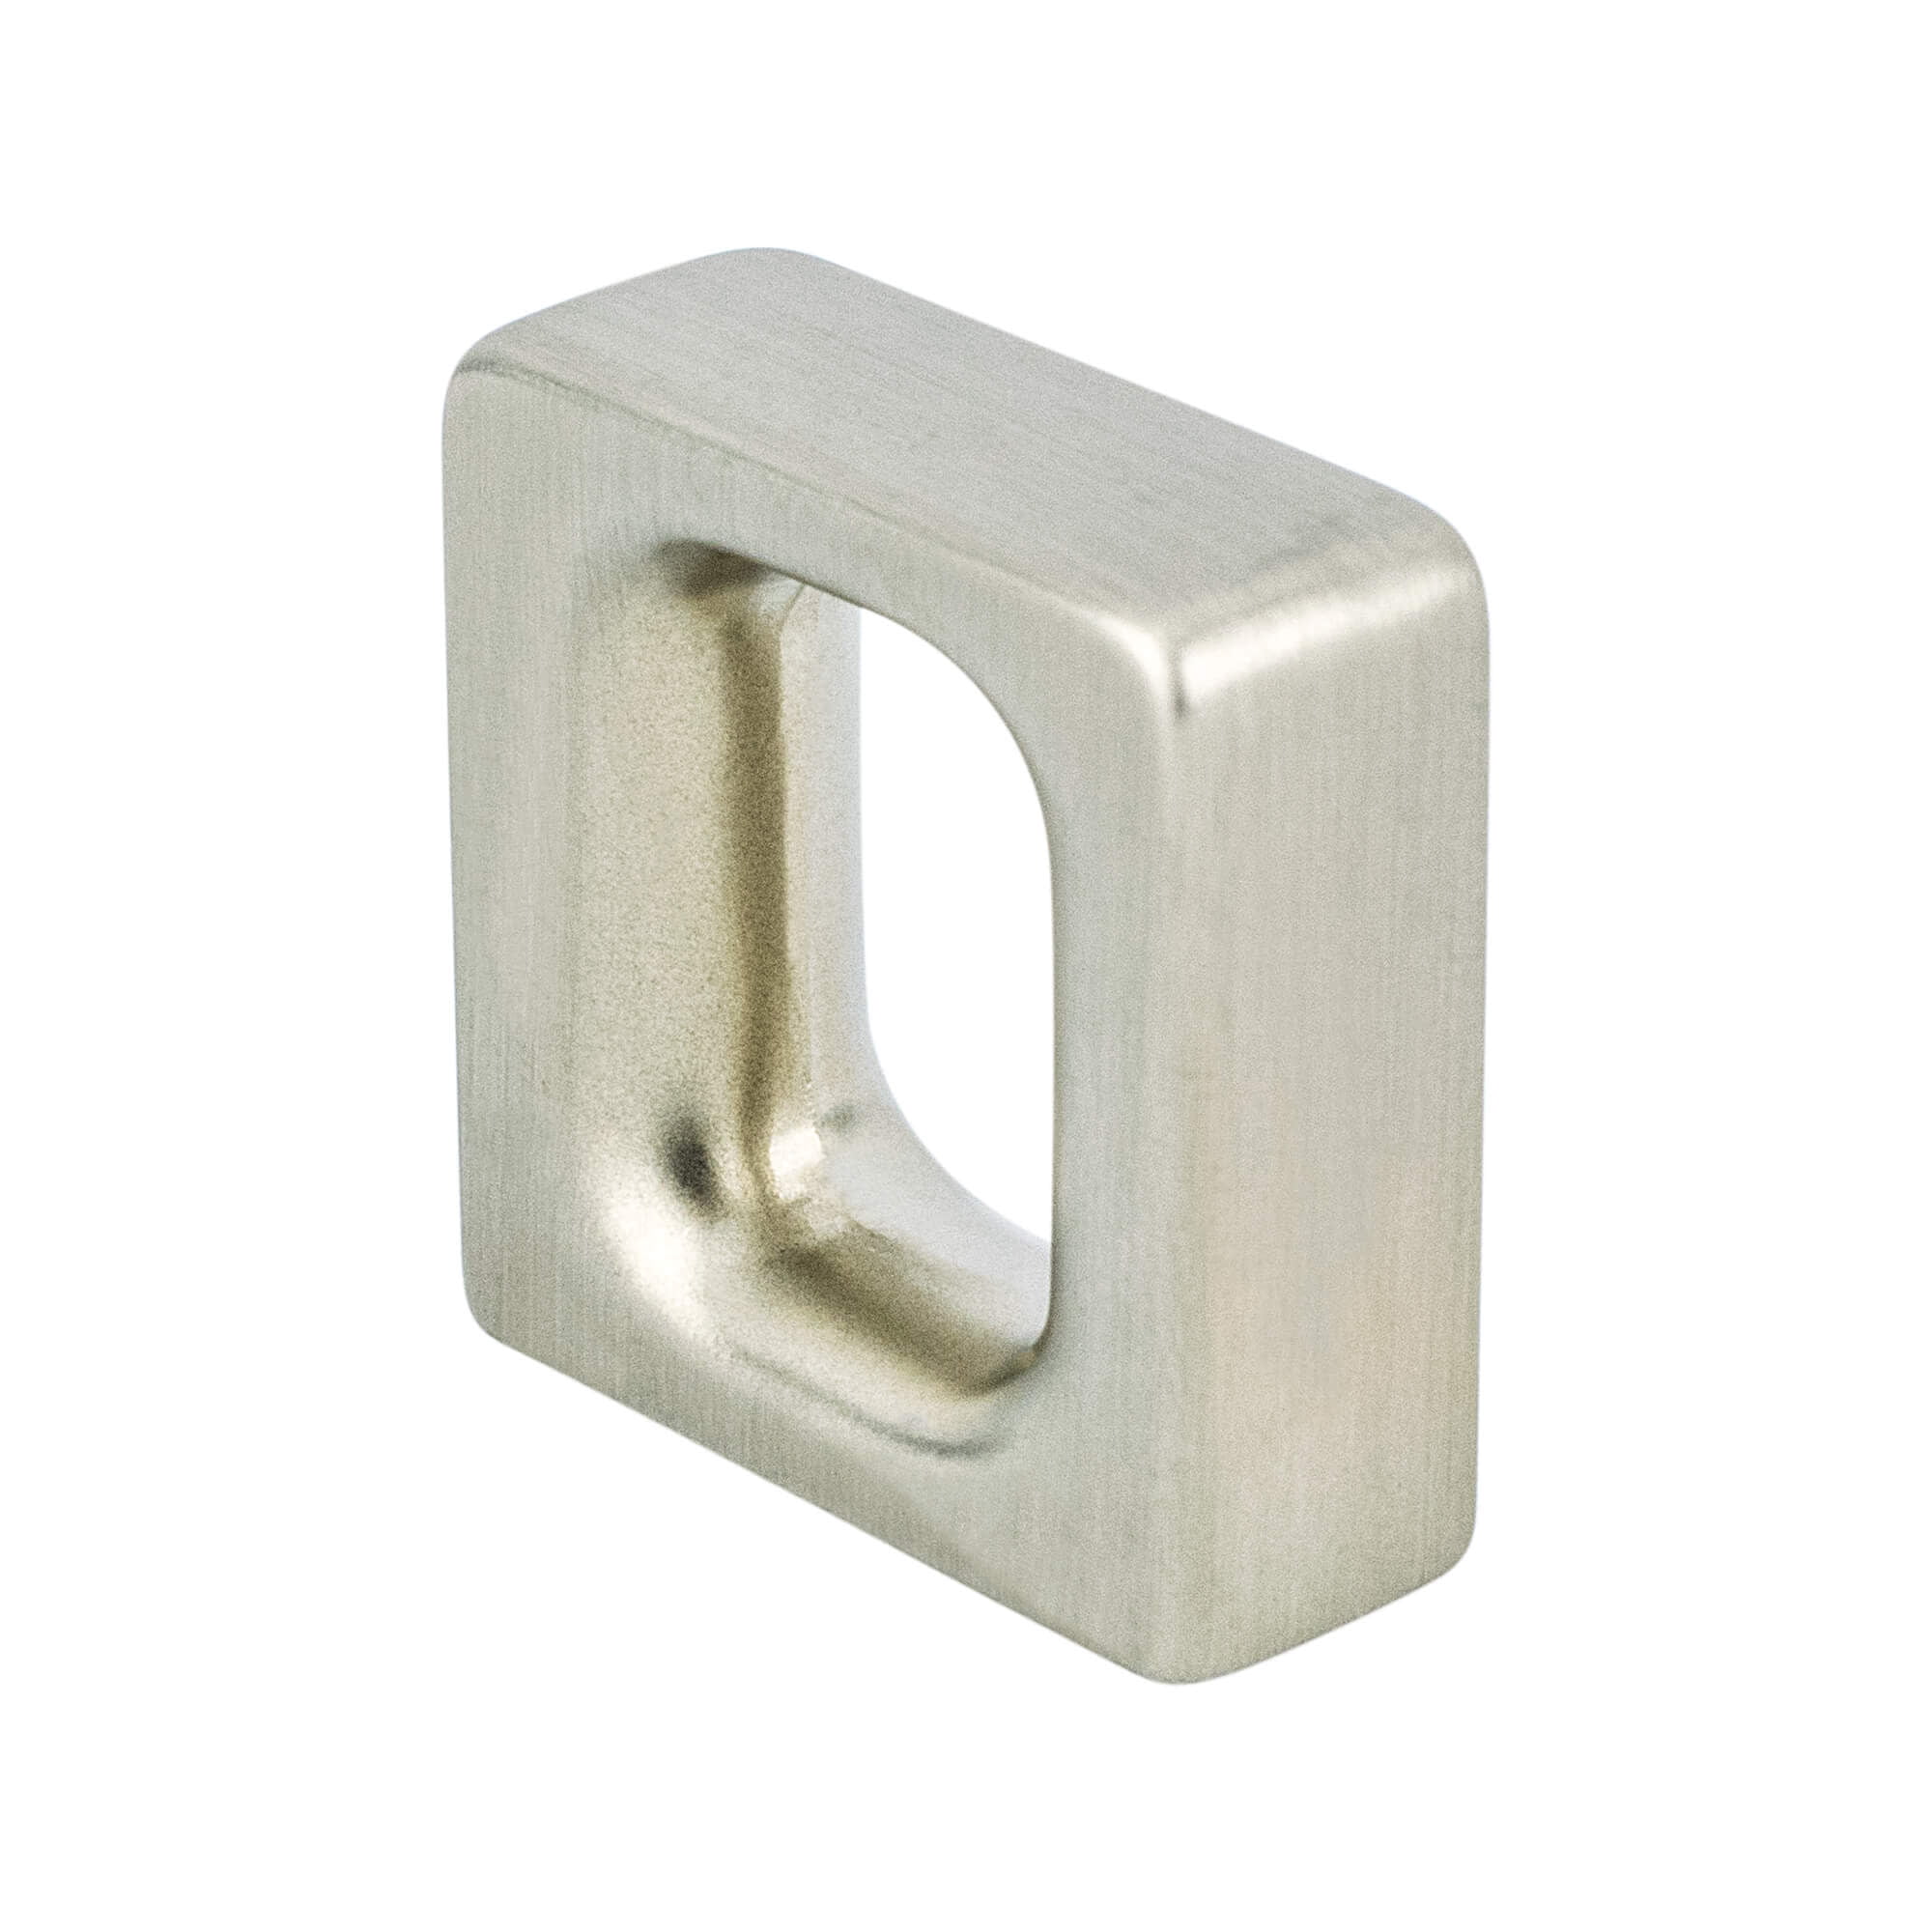 9311-1bpn-c 16 Mm Cc Dual Pull With Brushed Nickel